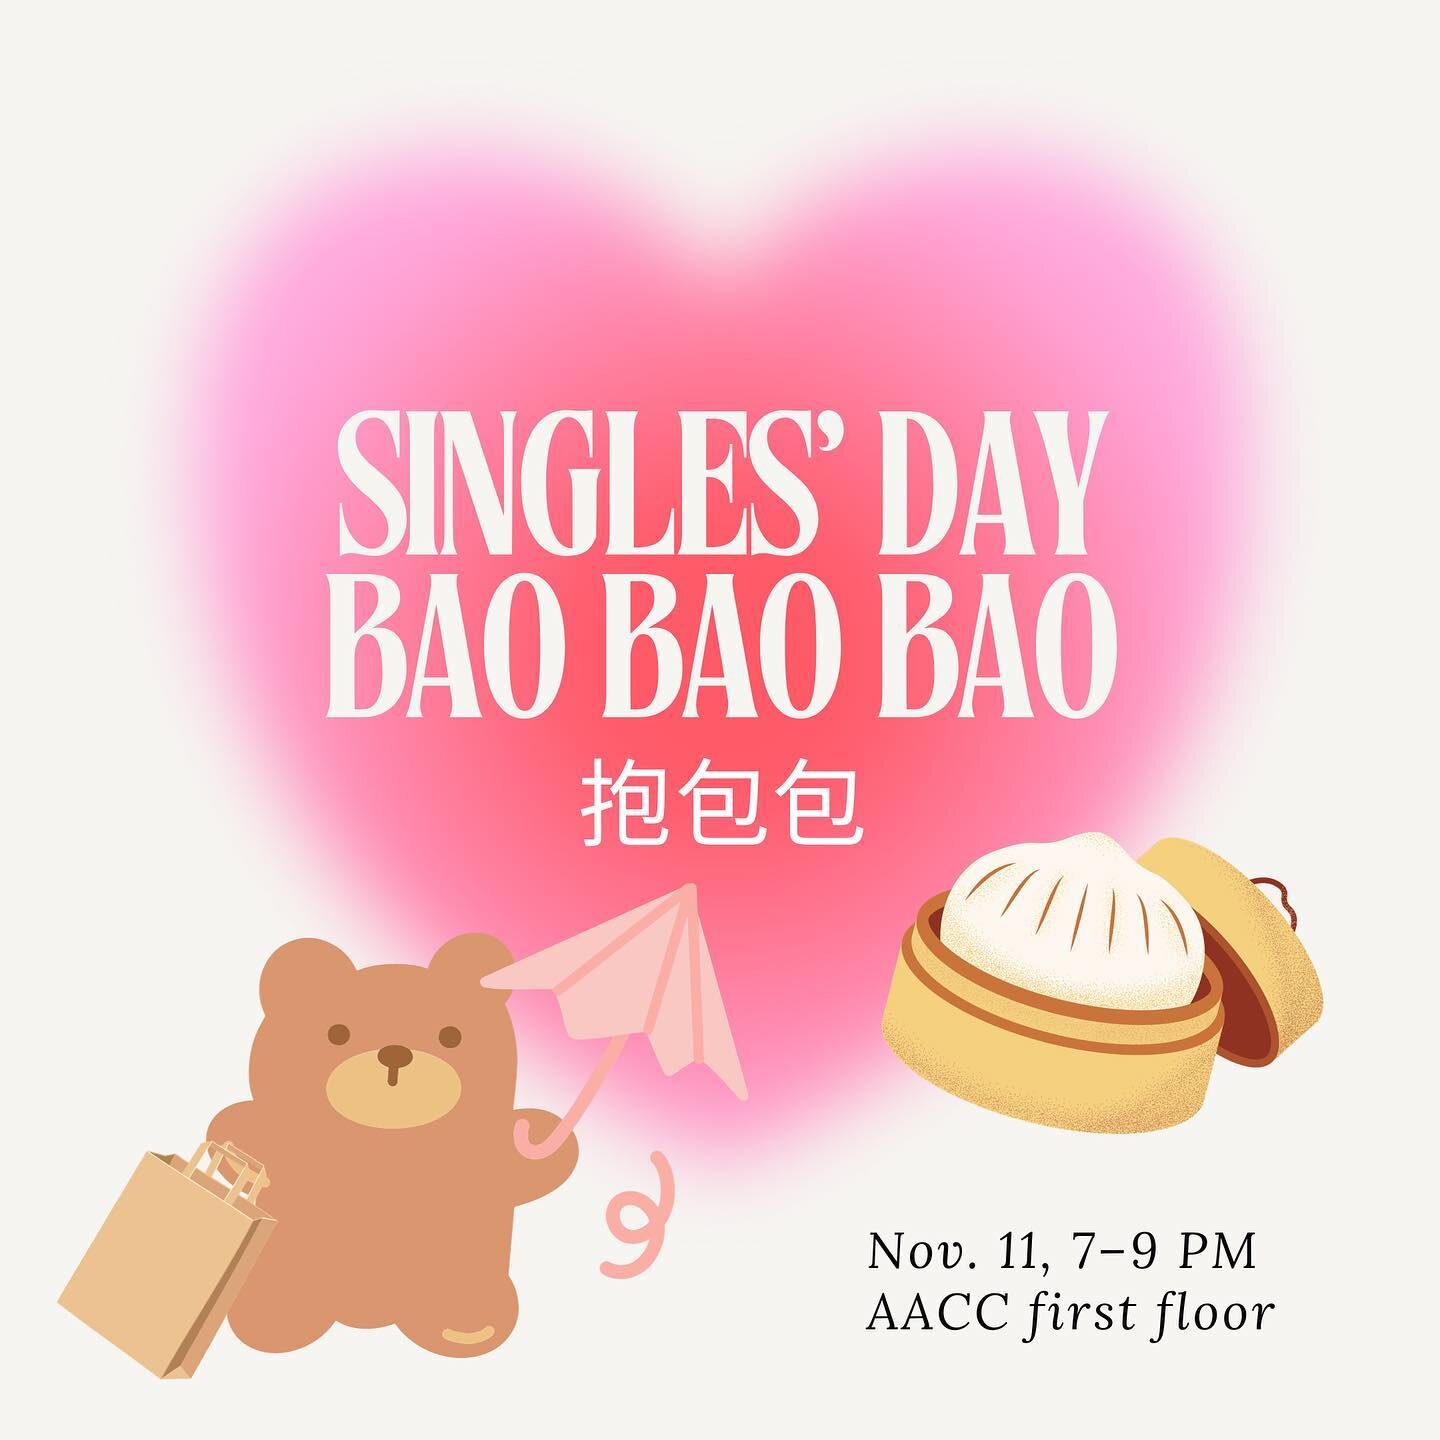 Come join us on 11/11 from 7&ndash;9 PM @ the AACC for our Singles&rsquo; Day event, Bao Bao Bao (抱包包: Bear hugs, Bags, and Buns)! 🧸🛍️🥟

Wind down while enjoying games like Mario Kart and ping pong and stay to mingle with your fellow CASA members!